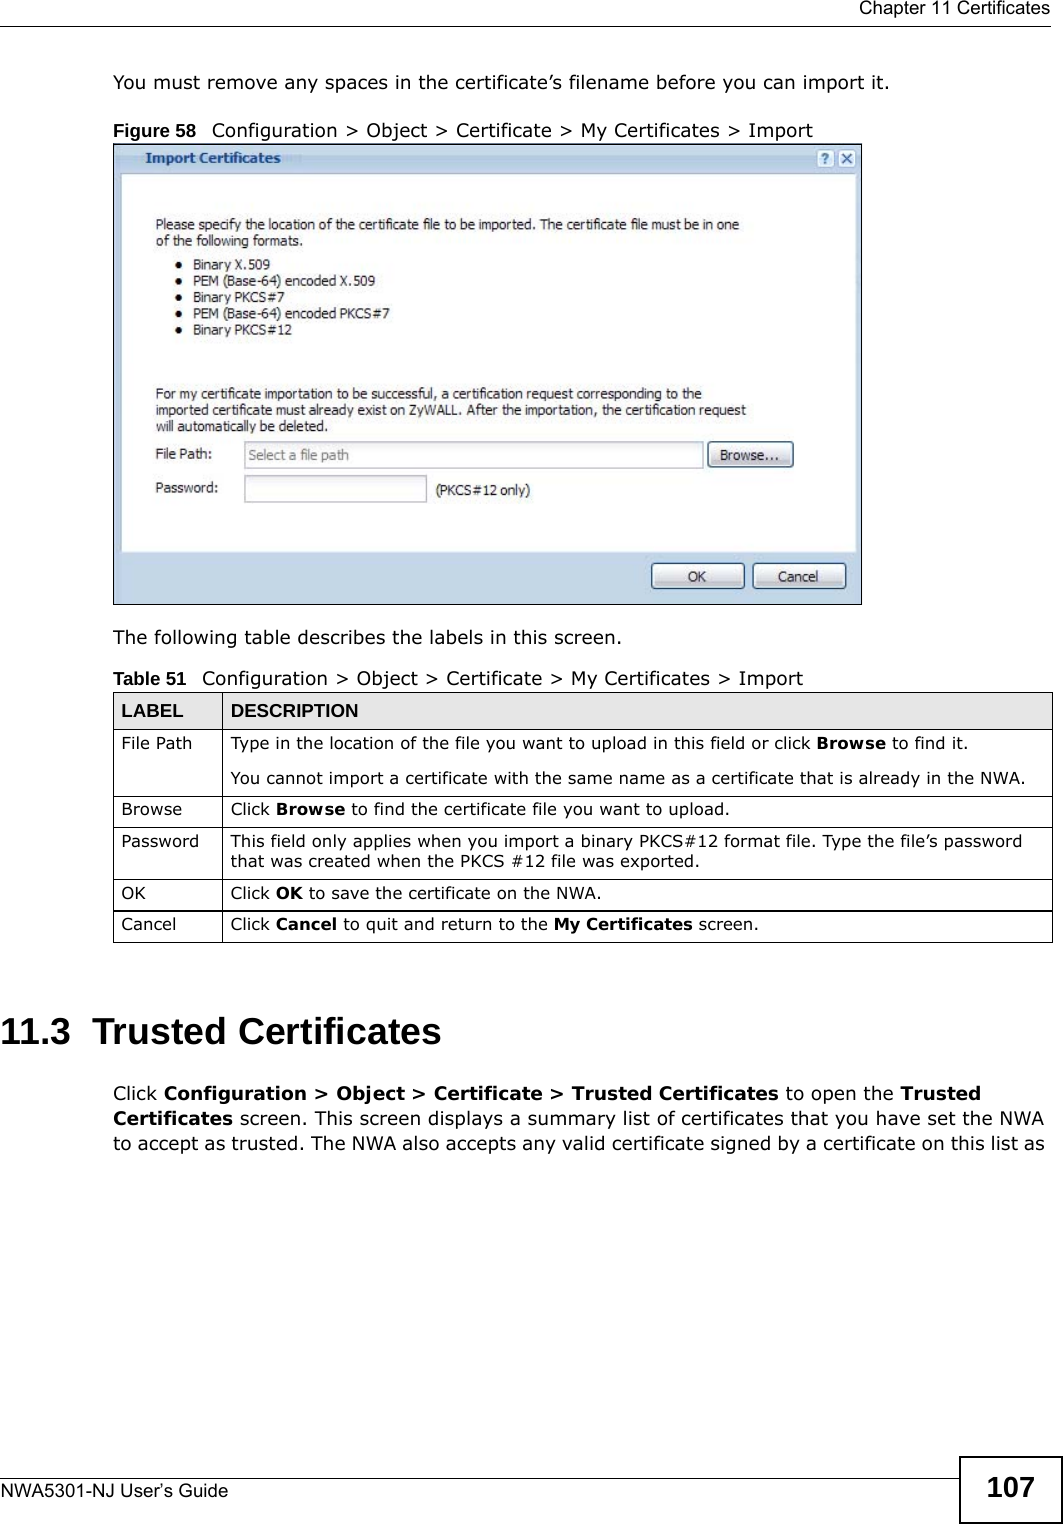  Chapter 11 CertificatesNWA5301-NJ User’s Guide 107You must remove any spaces in the certificate’s filename before you can import it.Figure 58   Configuration &gt; Object &gt; Certificate &gt; My Certificates &gt; ImportThe following table describes the labels in this screen.  11.3  Trusted CertificatesClick Configuration &gt; Object &gt; Certificate &gt; Trusted Certificates to open the Trusted Certificates screen. This screen displays a summary list of certificates that you have set the NWA to accept as trusted. The NWA also accepts any valid certificate signed by a certificate on this list as Table 51   Configuration &gt; Object &gt; Certificate &gt; My Certificates &gt; ImportLABEL DESCRIPTIONFile Path  Type in the location of the file you want to upload in this field or click Browse to find it.You cannot import a certificate with the same name as a certificate that is already in the NWA.Browse Click Browse to find the certificate file you want to upload. Password This field only applies when you import a binary PKCS#12 format file. Type the file’s password that was created when the PKCS #12 file was exported. OK Click OK to save the certificate on the NWA.Cancel Click Cancel to quit and return to the My Certificates screen.